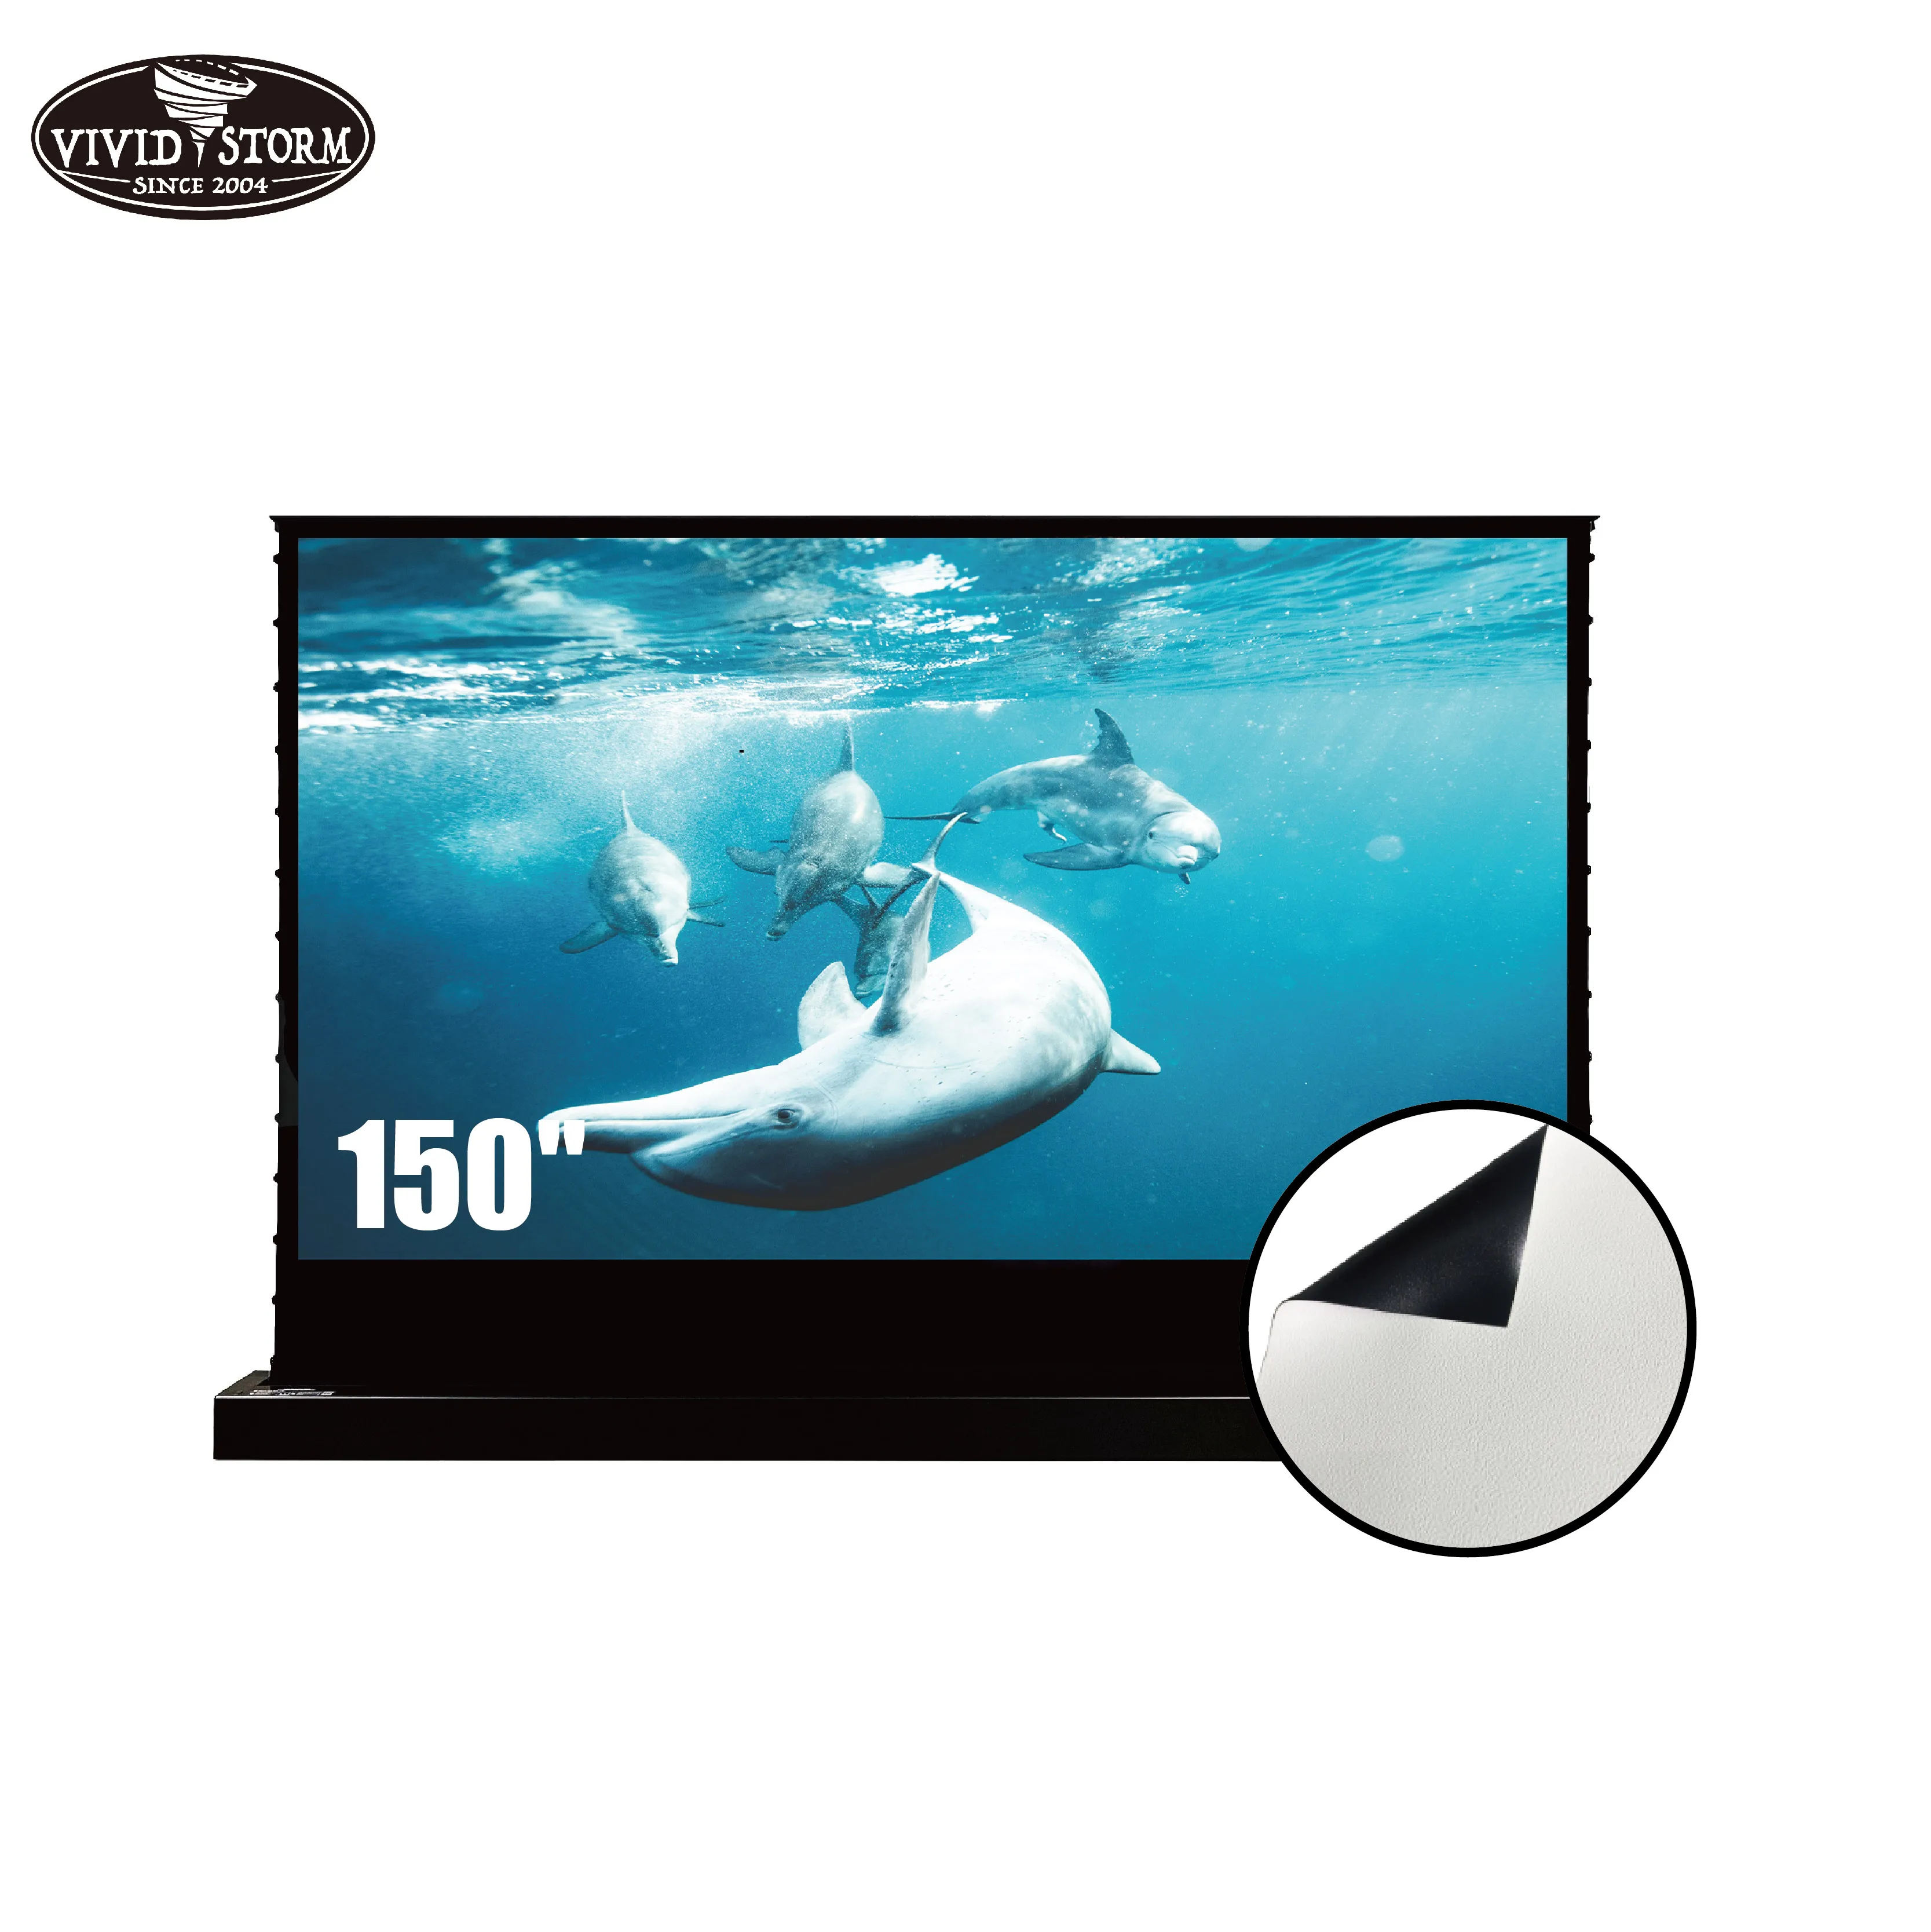 

VIVIDSTORM 150 inch 16:9 Electric tab-tensioned floor screen with Cinema White Screen Material rollable portable stand screen